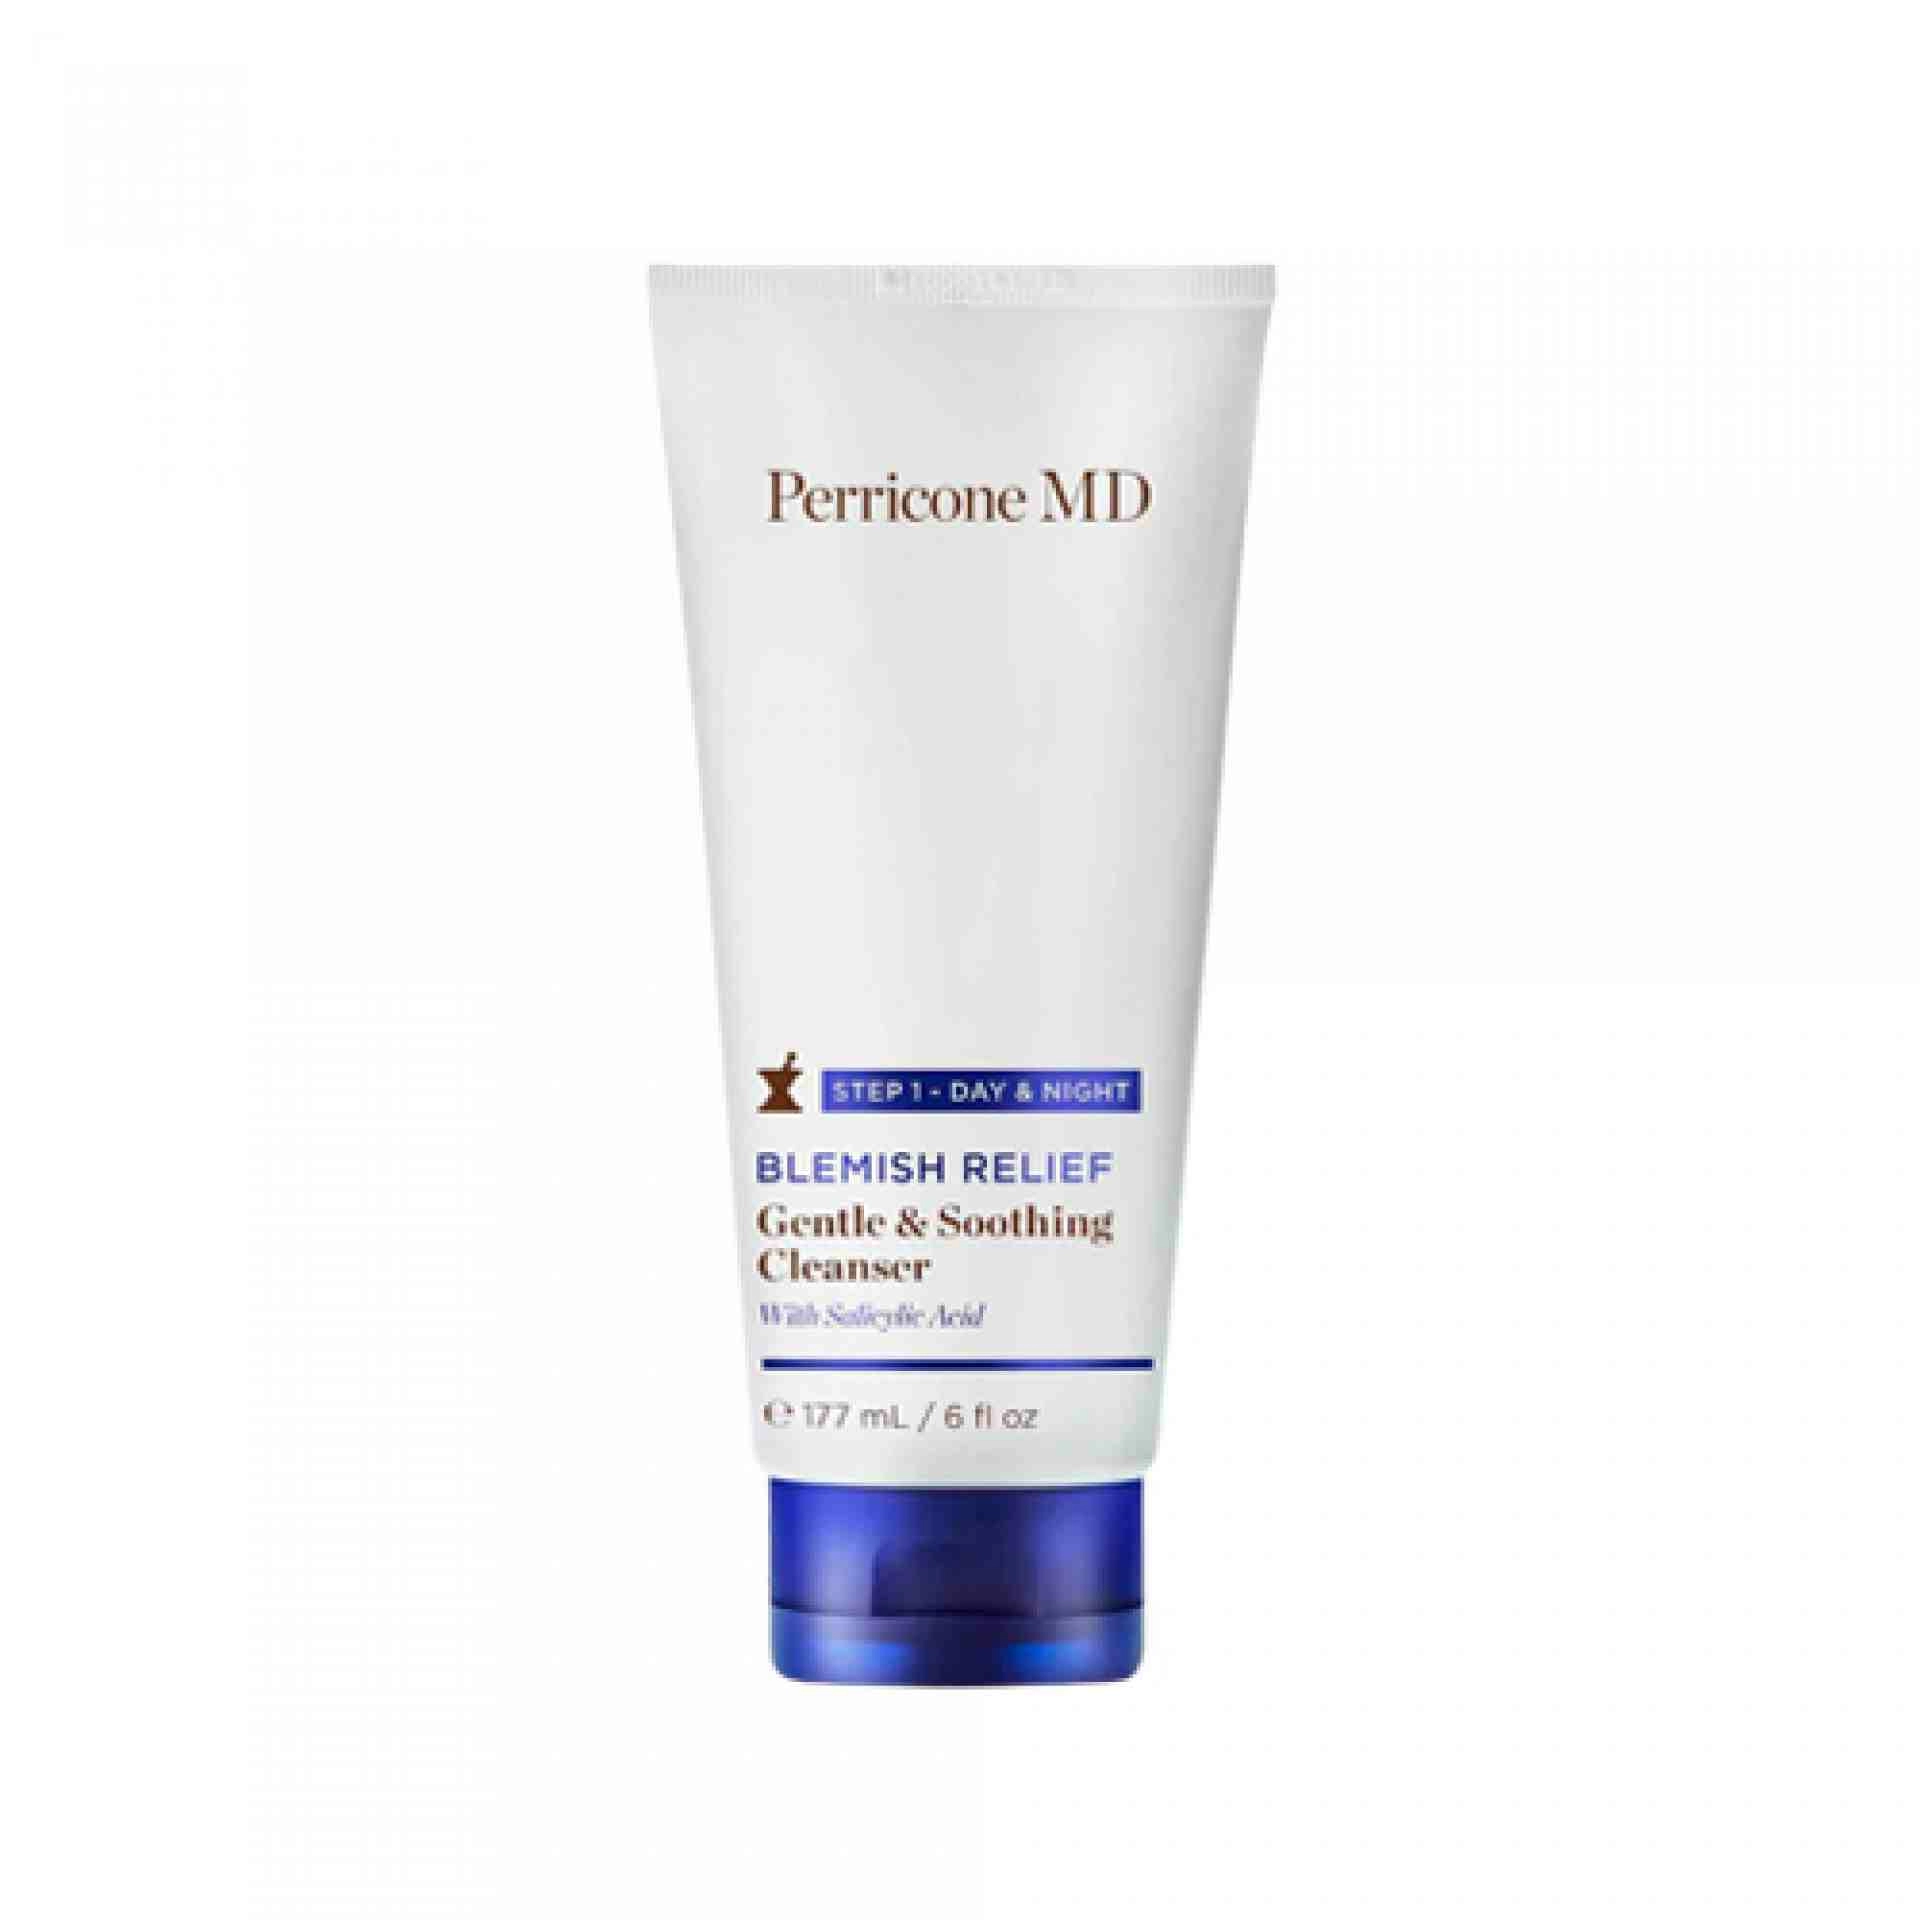 Gentle & Soothing Cleanser | Limpiador para Imperfecciones 177ml - Blemish Relief - Perricone MD ®